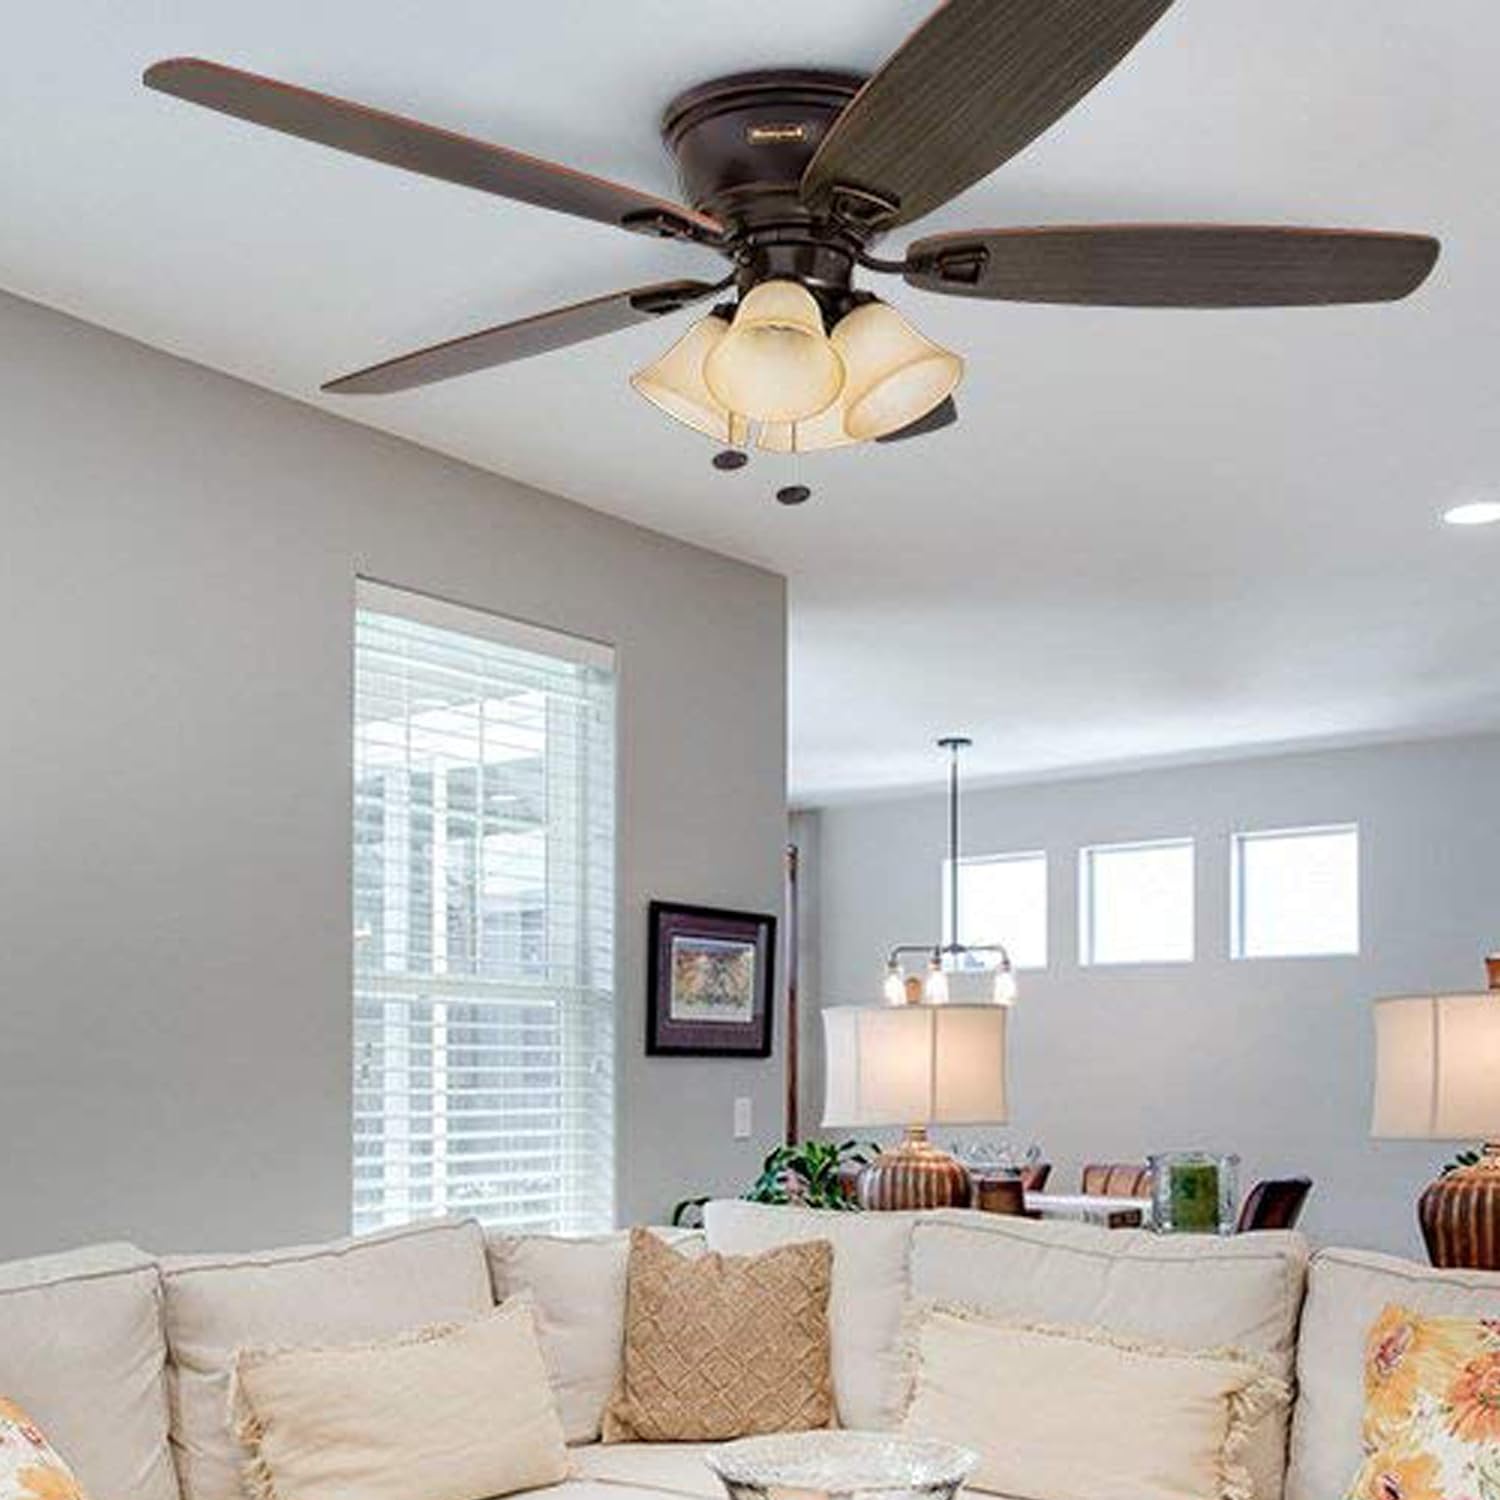 Honeywell Glen Alden - 52-in Contemporary Indoor Fan - Flush Mount Ceiling Fan with Pull Chain - Room Fan with No Light - Model 50183 (Oi